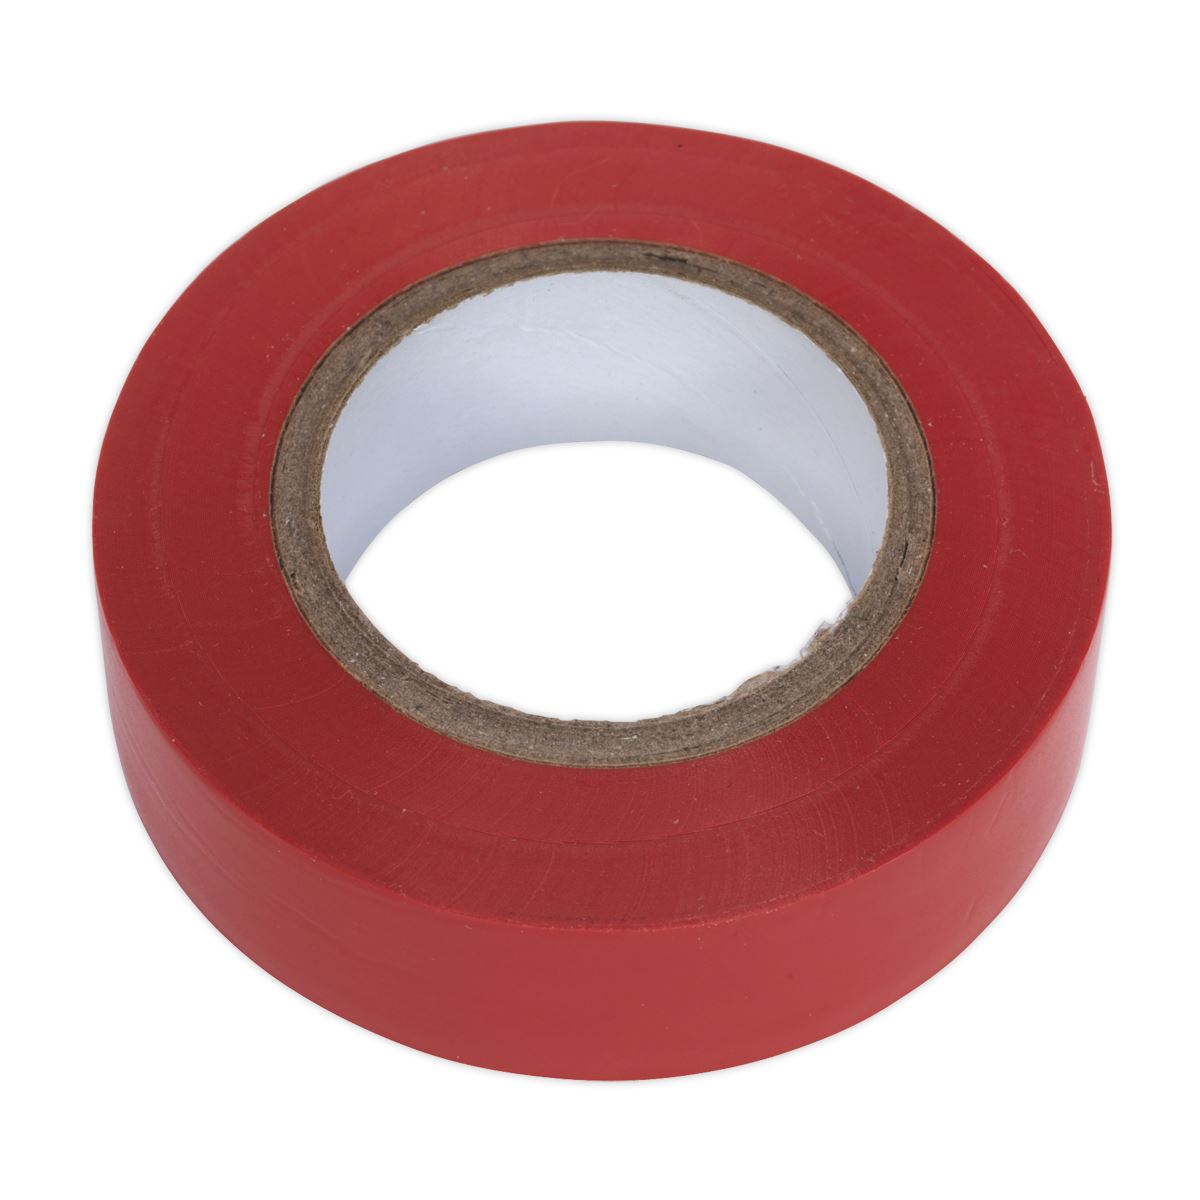 Sealey PVC Insulating Tape 19mm x 20m Red Pack of 10